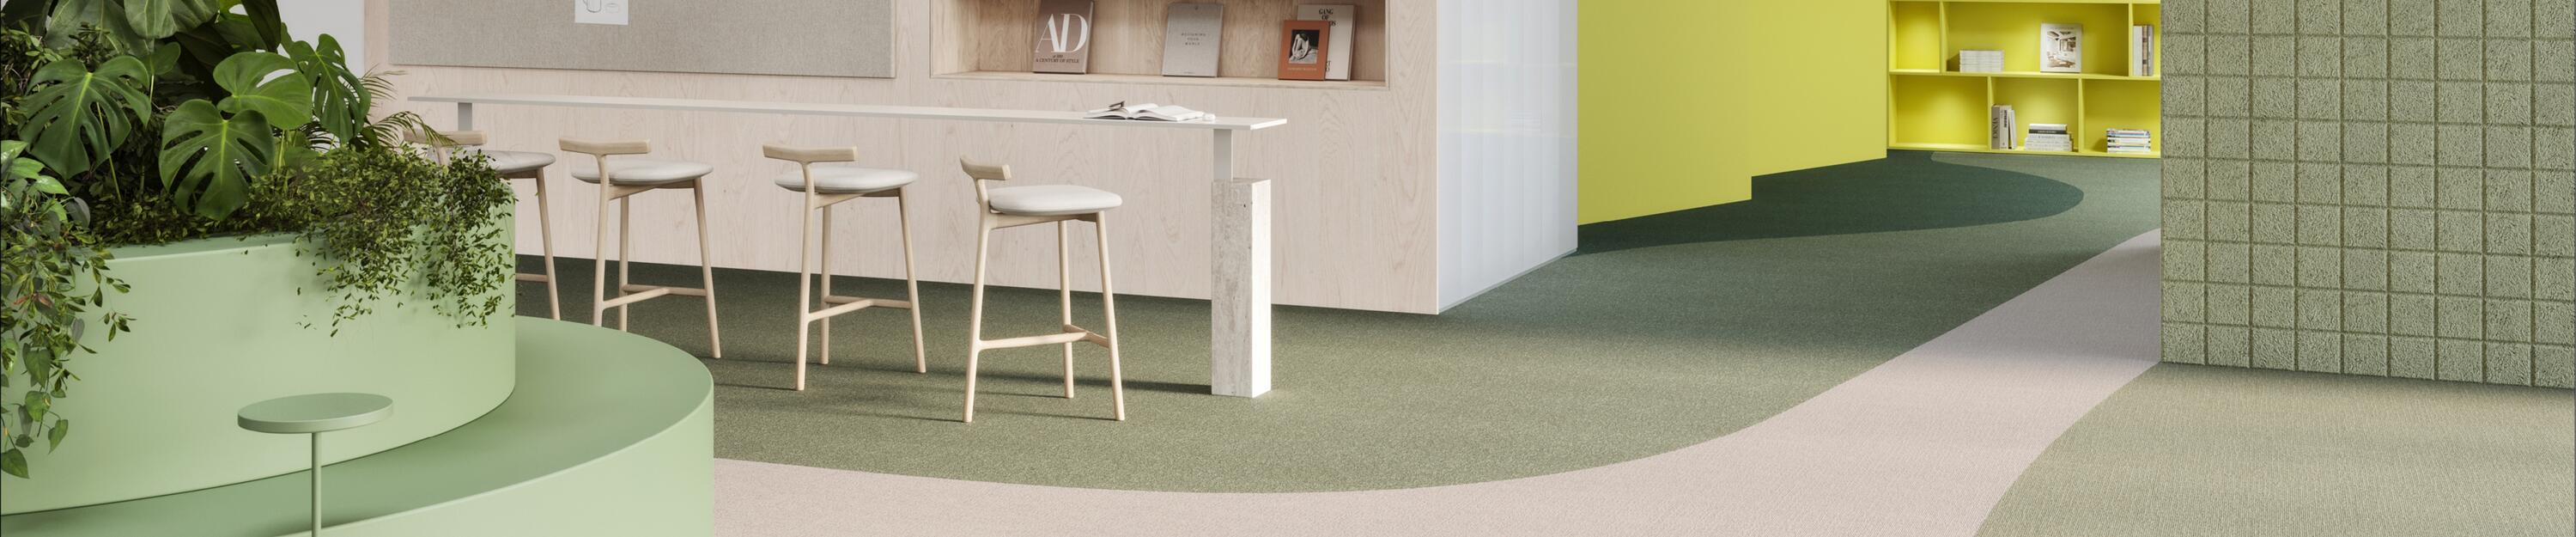 Modern and colorful workspace designed with wellbeing in mind, showcasing the DESSO AirMaster collection